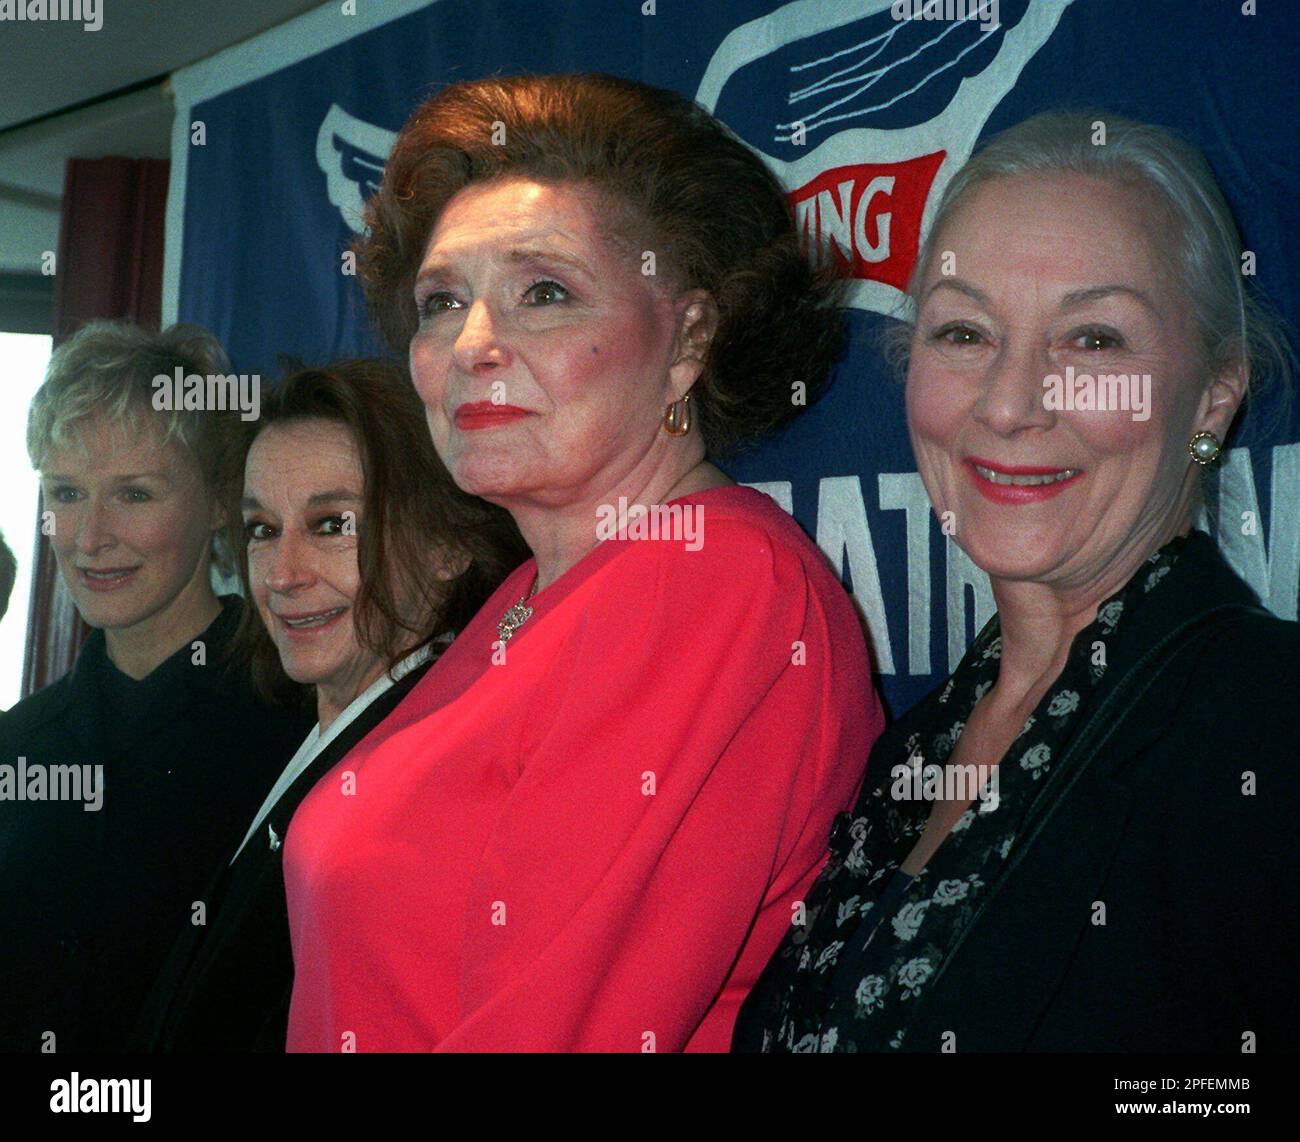 Four legendary Tony Award-winning actresses, left to right, Glenn Close,  Zoe Caldwell, Patricia Neal and Rosemary Harris, pose for a photo as they  are honored at the Rainbow Room in New York